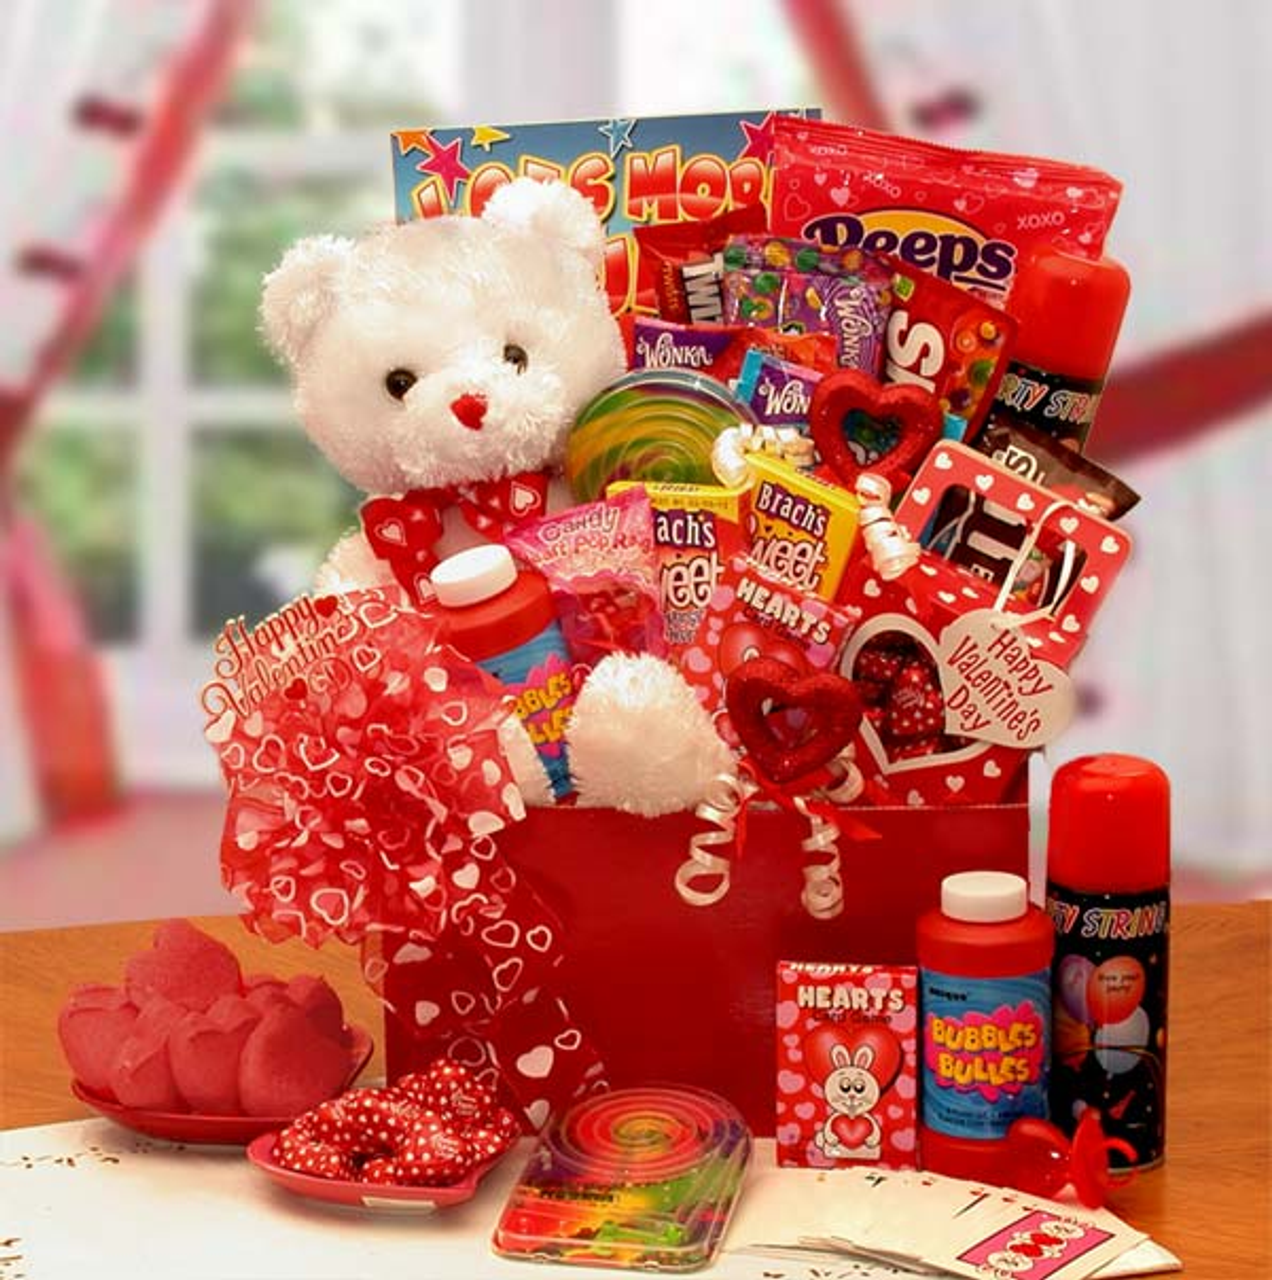 The Bear of Hearts Kids Valentine Gift Box - valentines day candy - valentines day gifts - valentines day gifts for kids